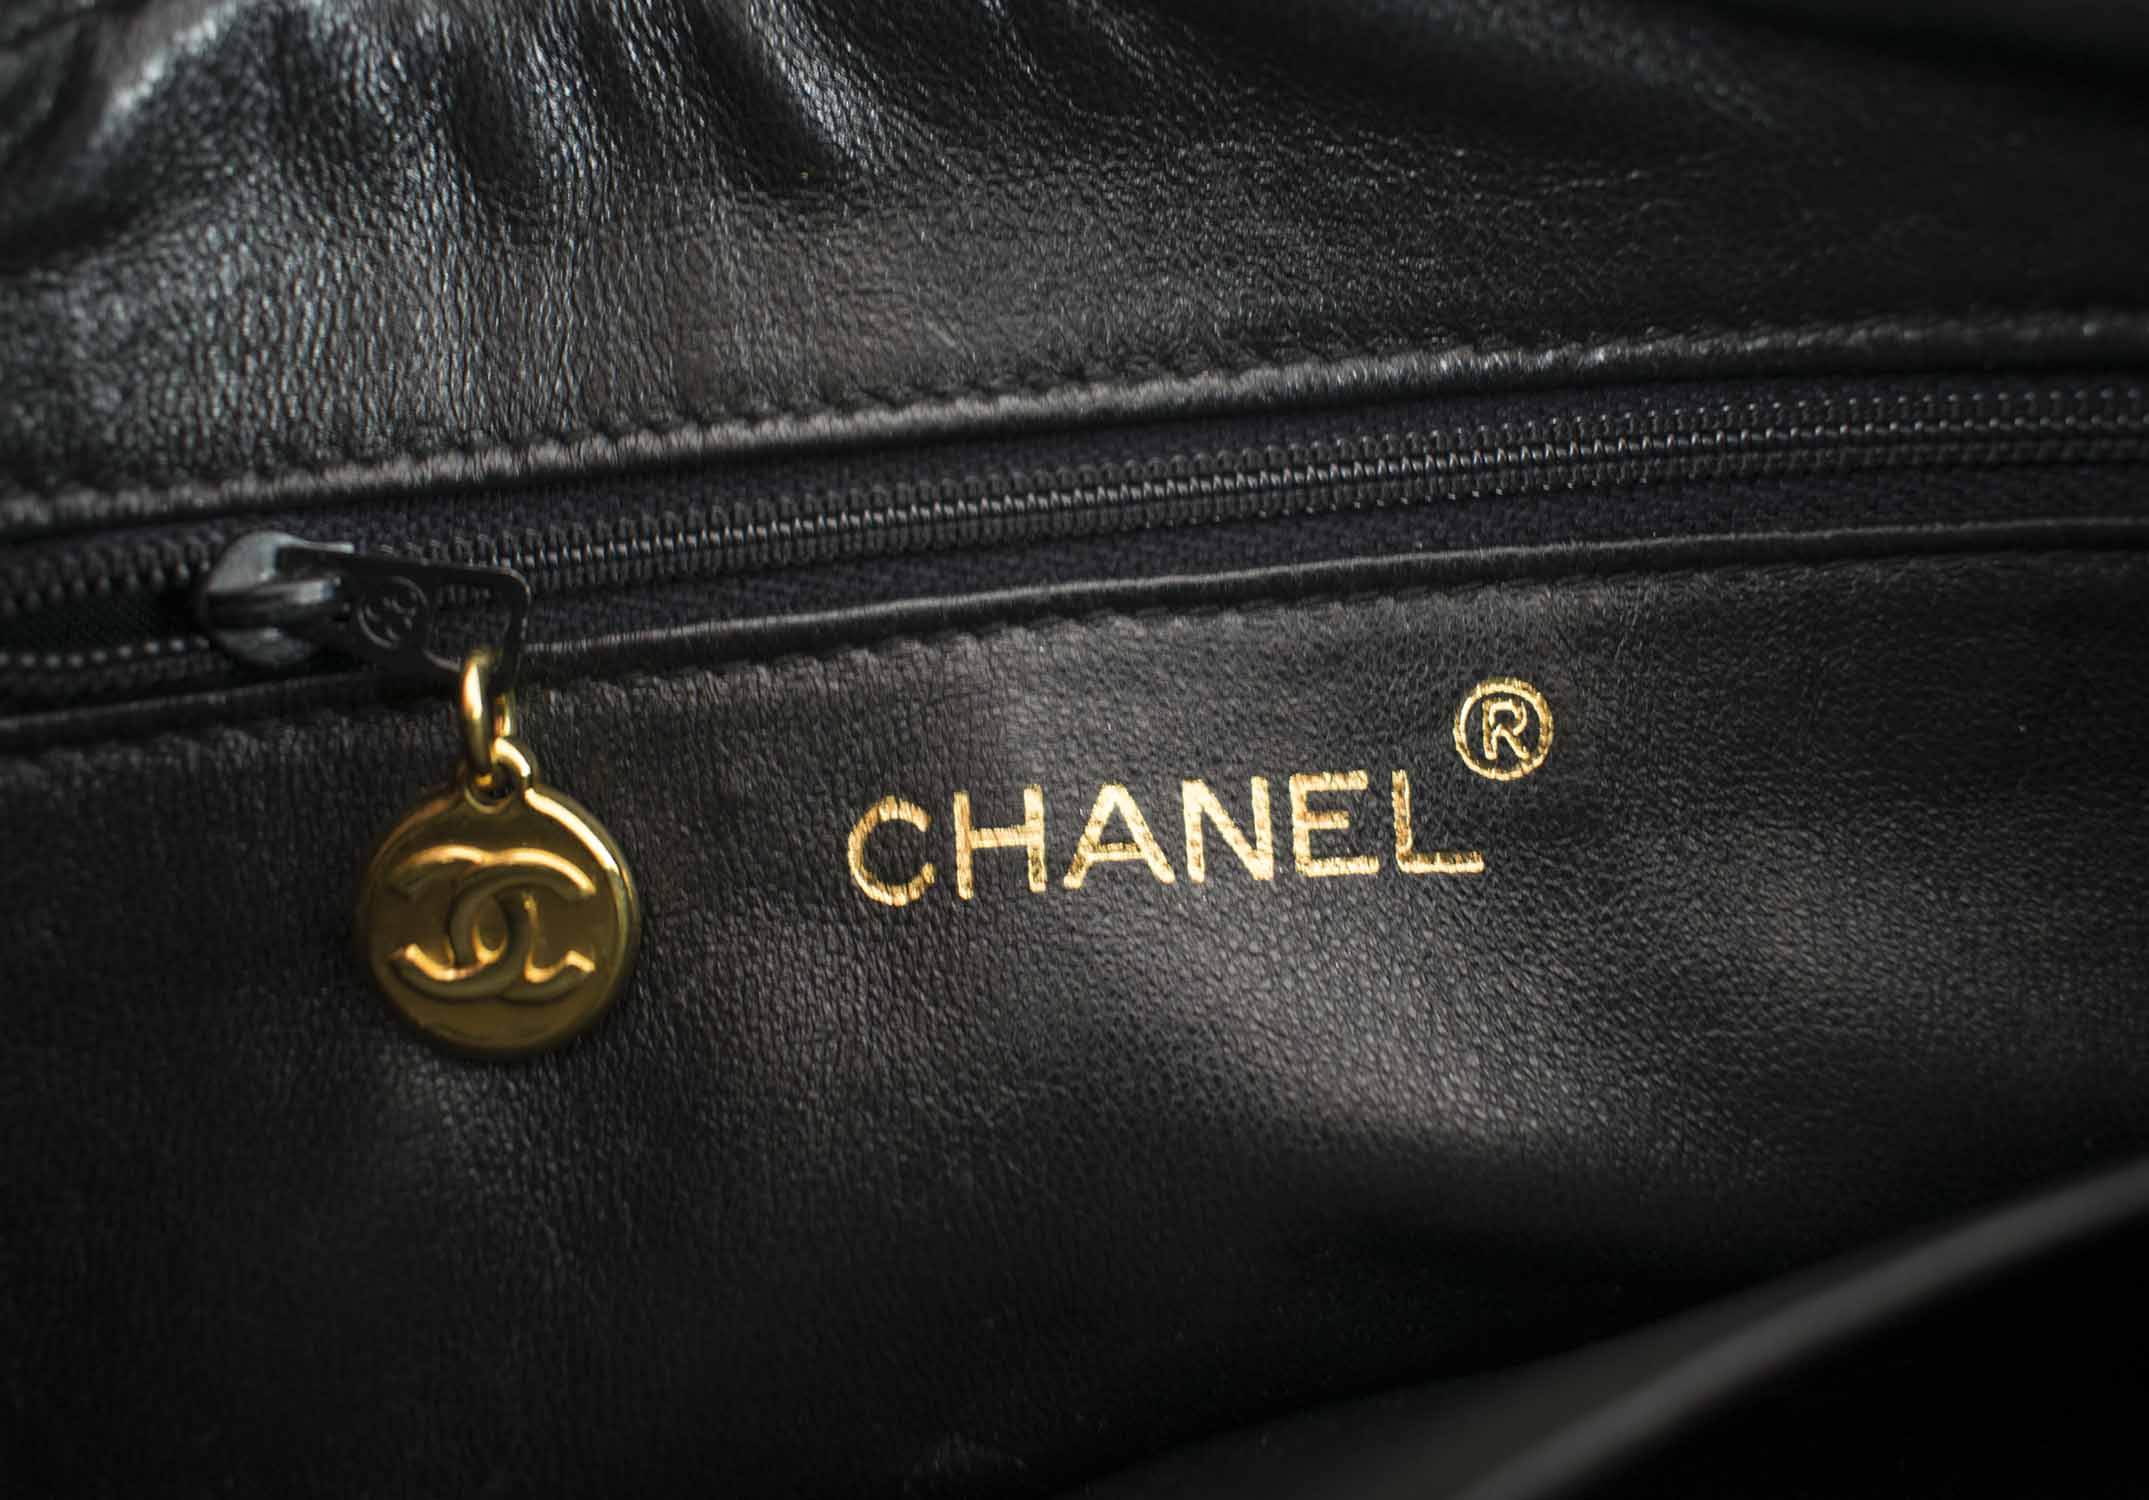 CHANEL CAMERA VINTAGE CHEVRON BAG, with top zip closure with charm pull,  one front pocket with CC turn lock closure, gold tone hardware and strap,  leather lining, authenticity card, c. 1991-1994, with